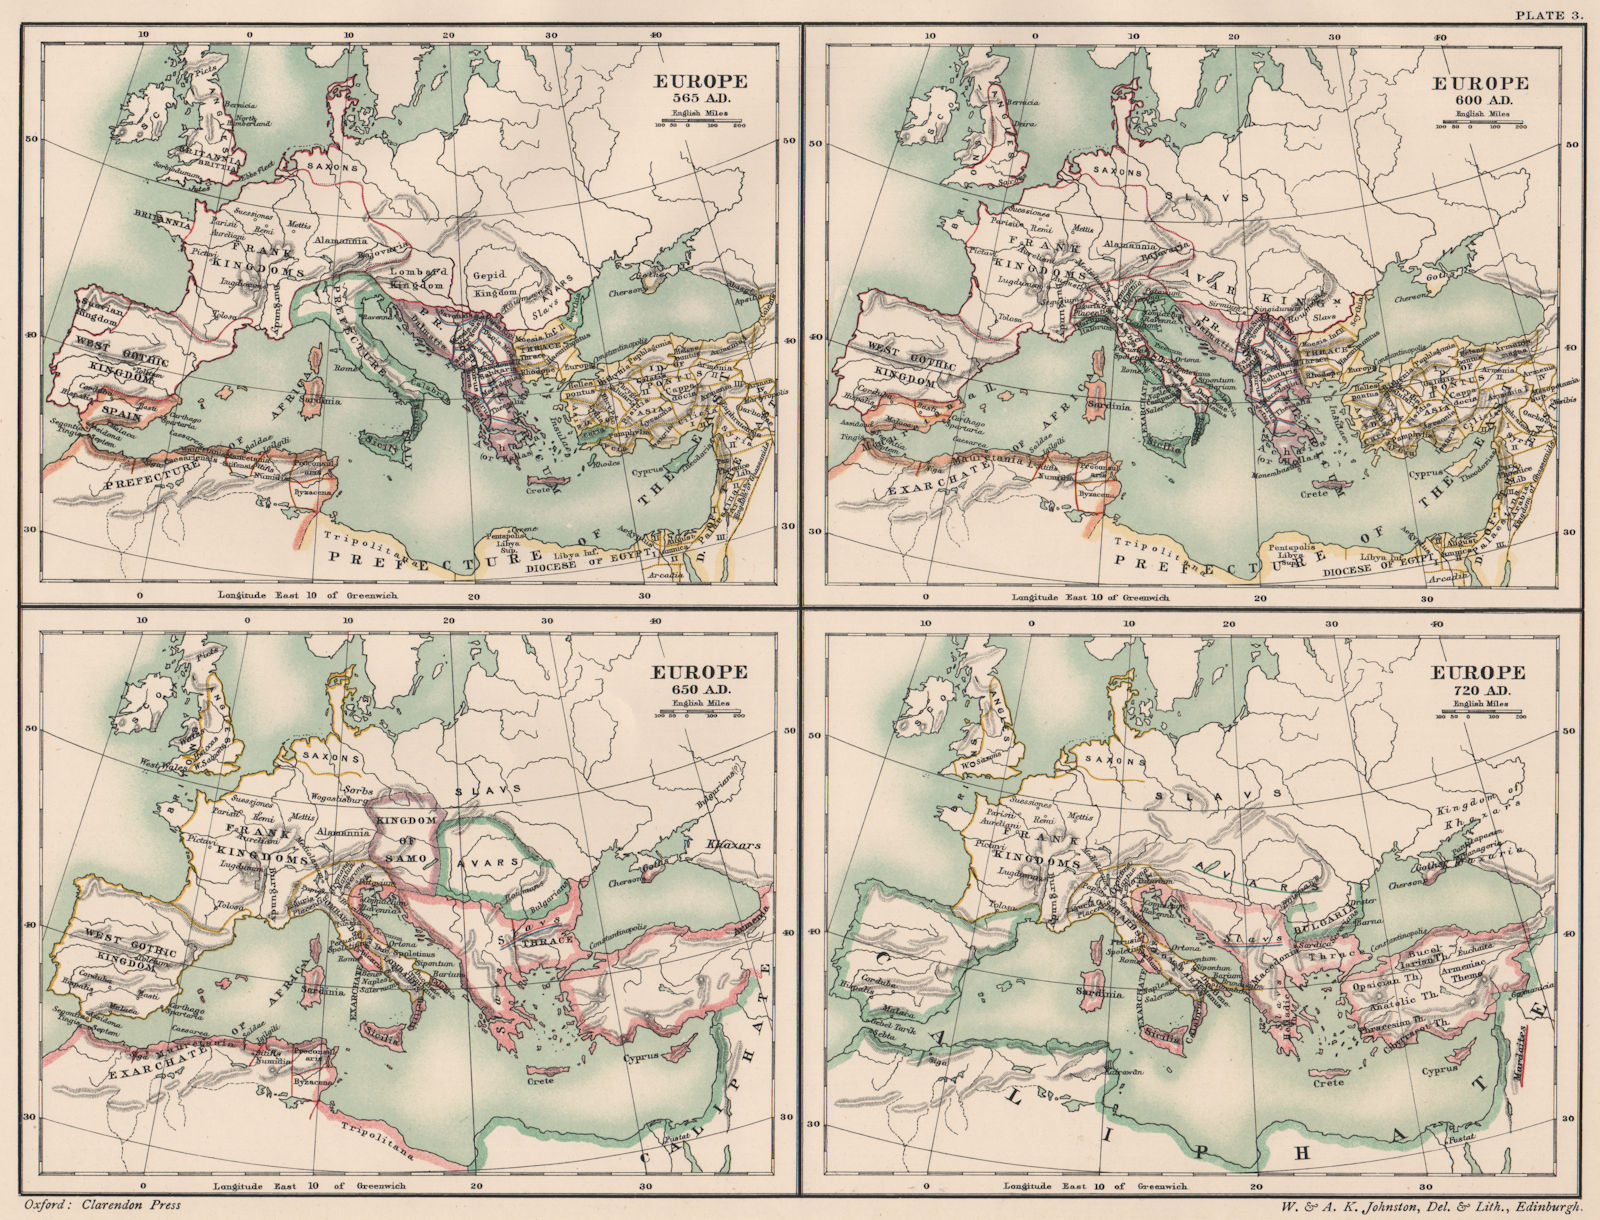 DARK AGES EUROPE. in 565 600 650 & 720 AD. 6th 7th & 8th centuries 1902 map